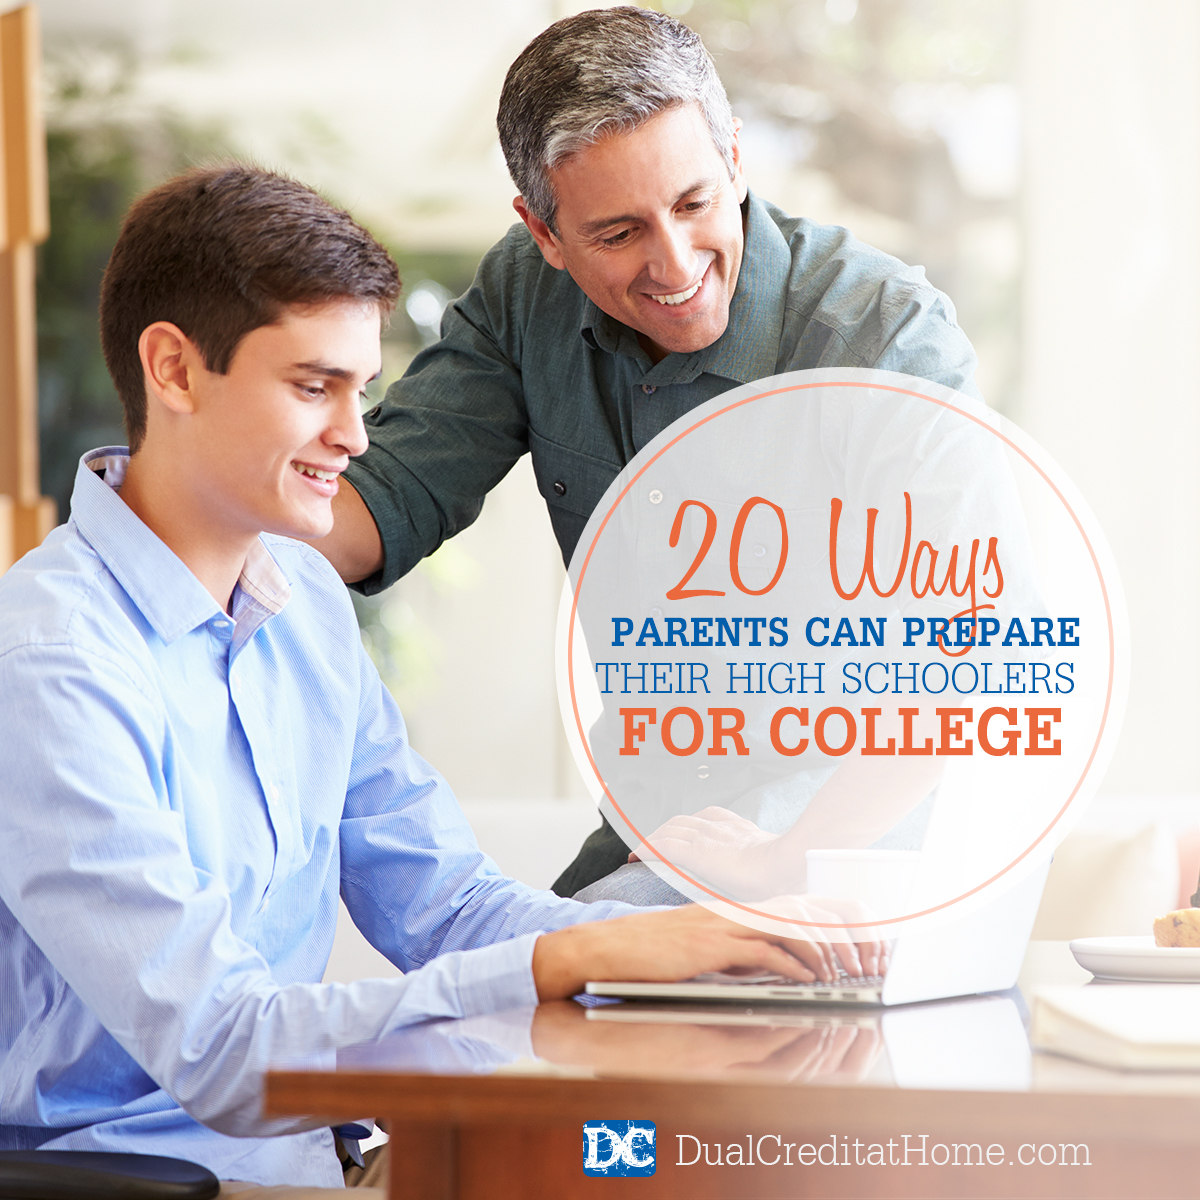 20 Ways Parents Can Prepare Their High Schoolers for College